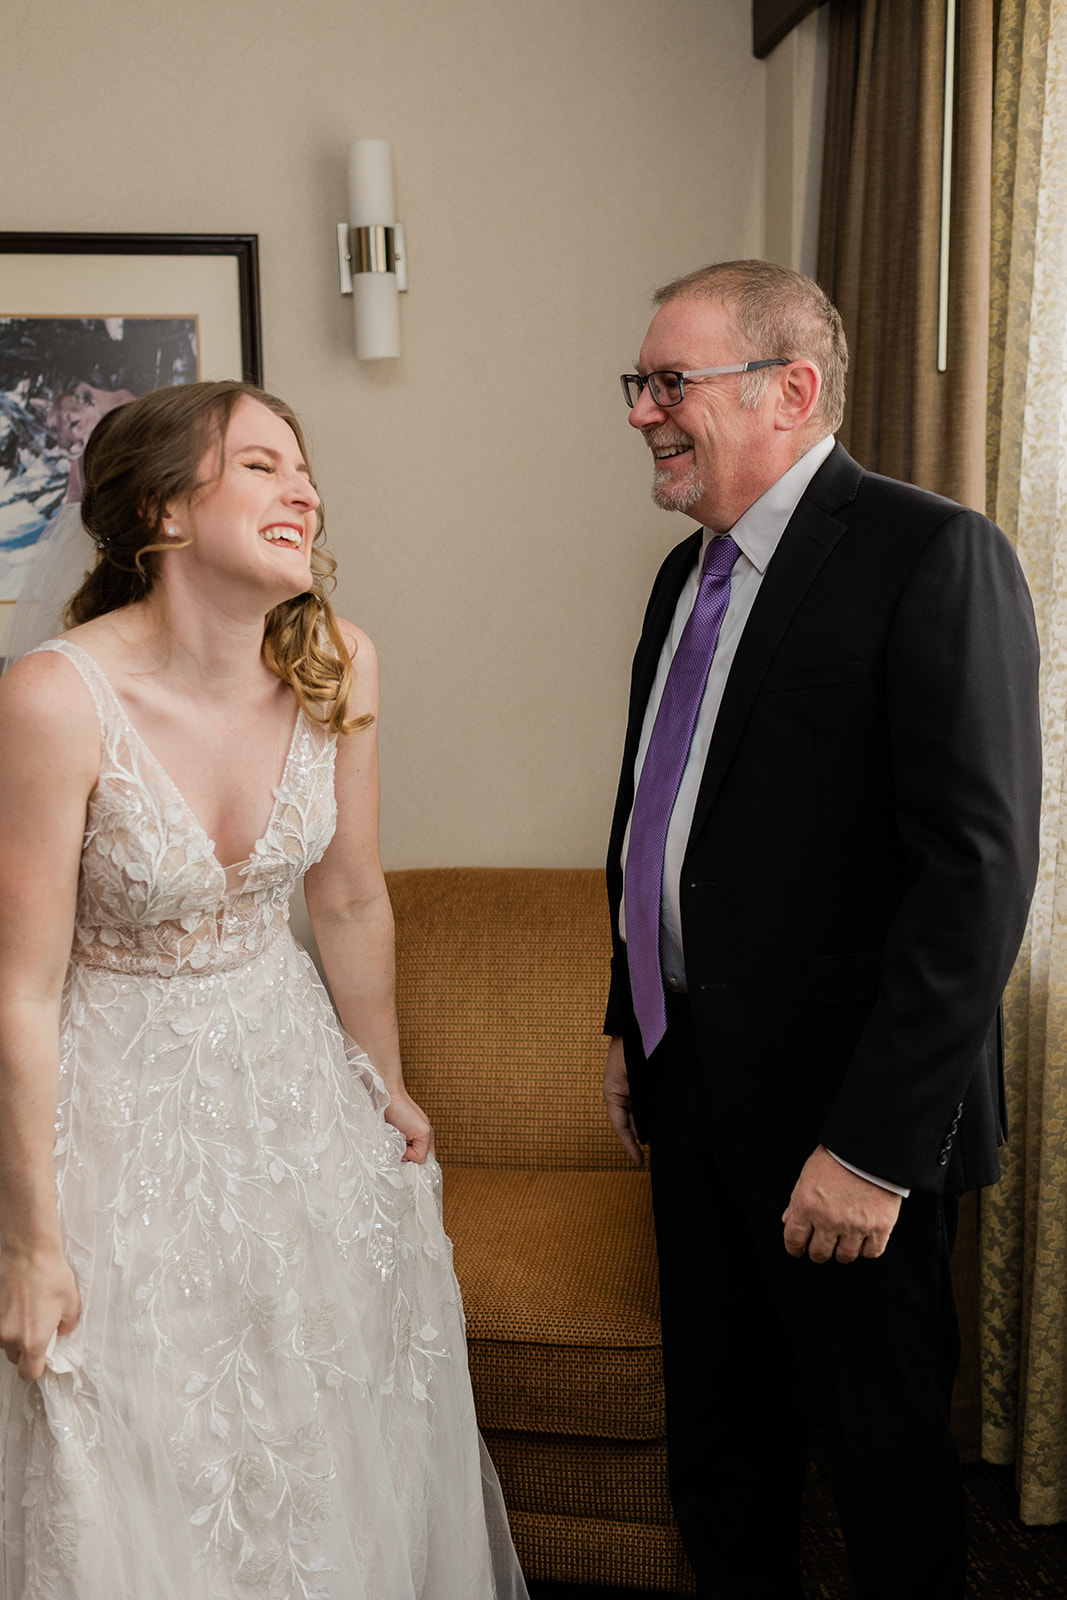 Father first look wedding photos Banff Alberta by Jess Collins 